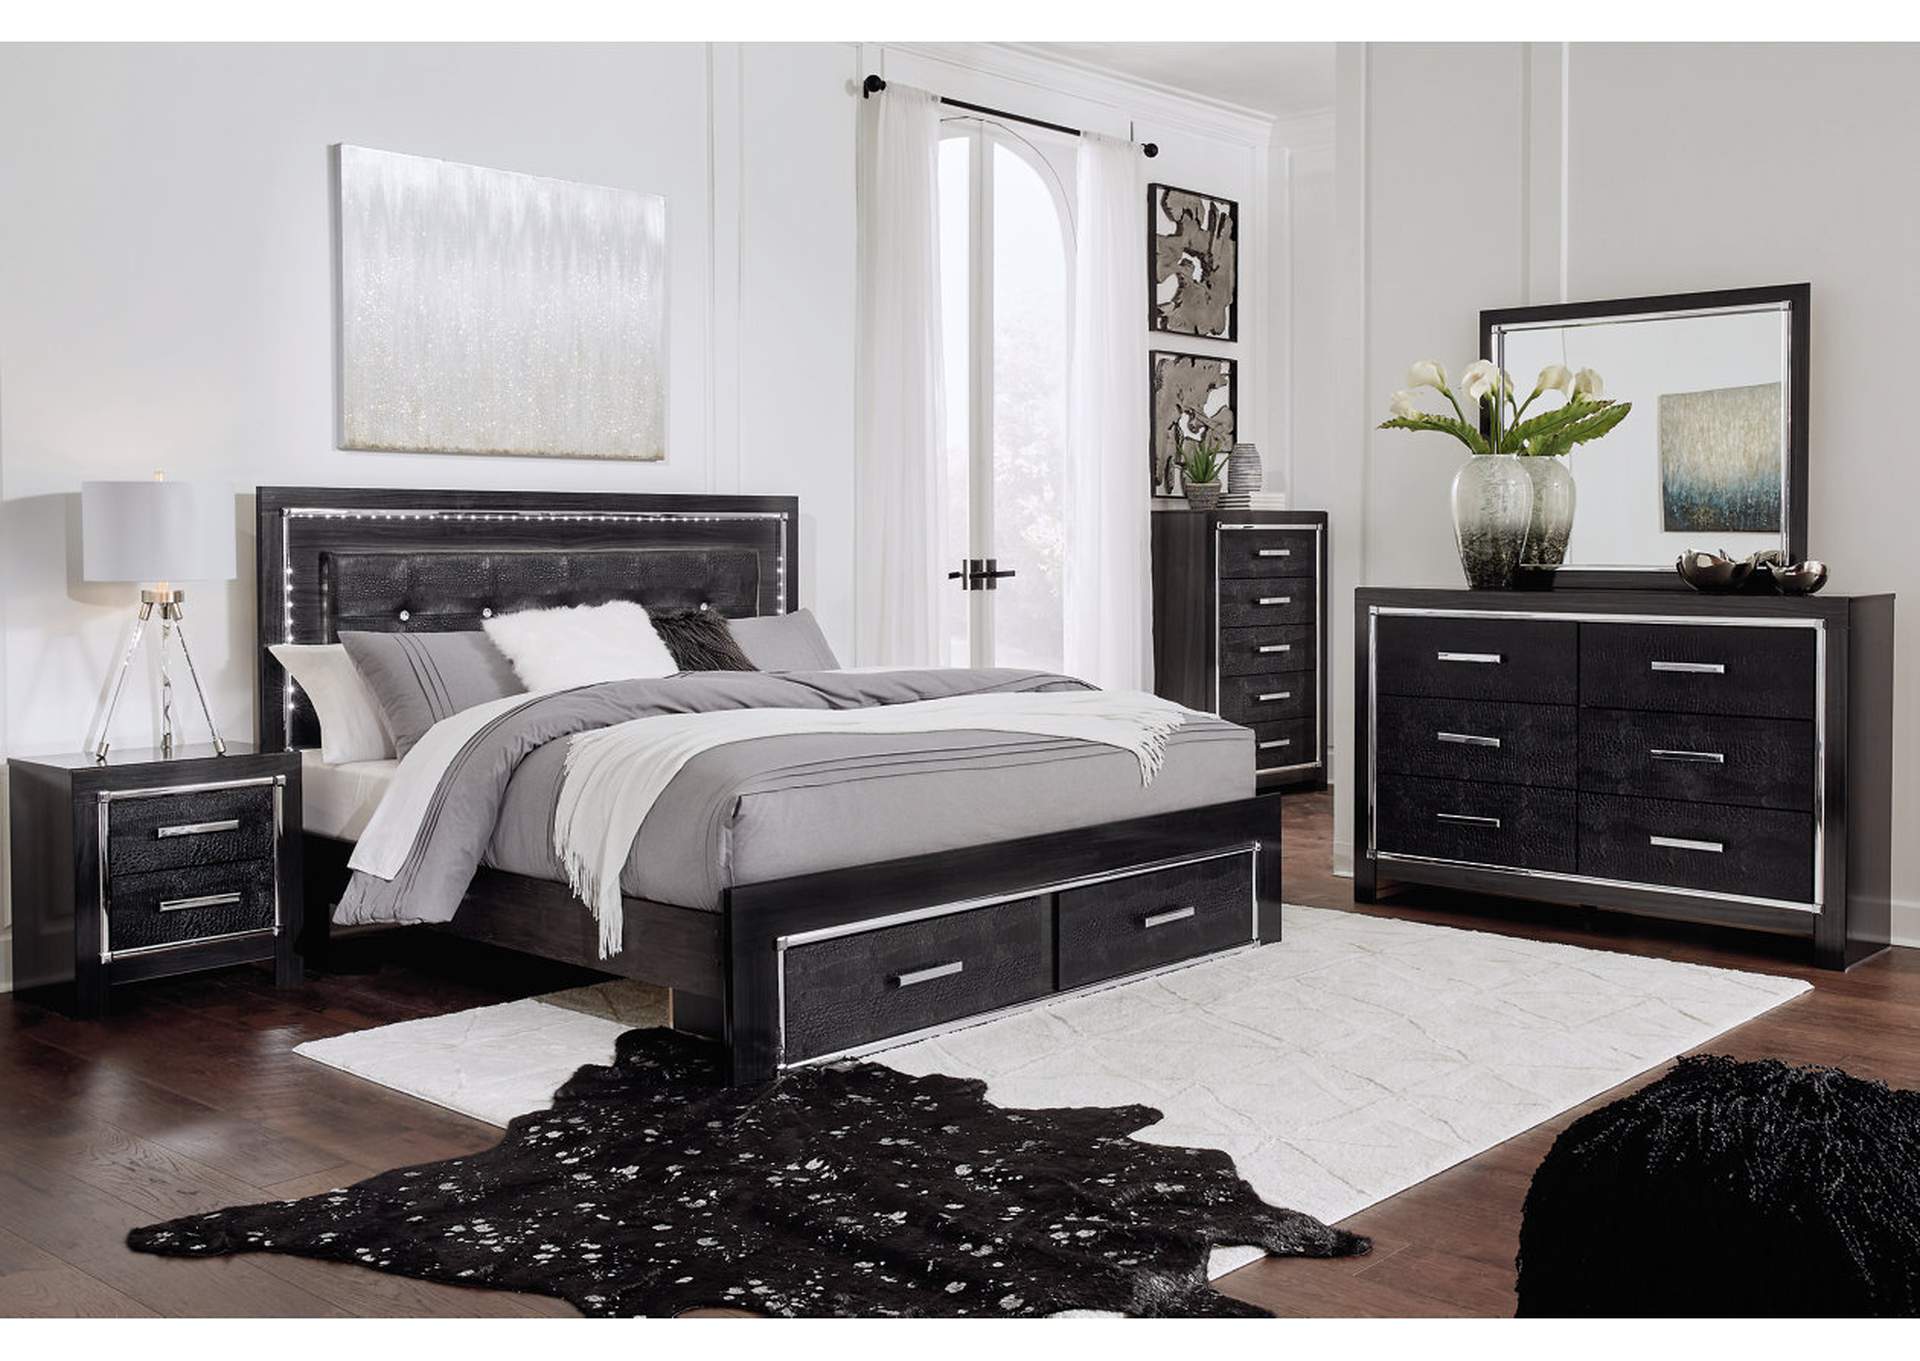 Kaydell King Storage Bed, Dresser, Mirror and Nightstand,Signature Design By Ashley